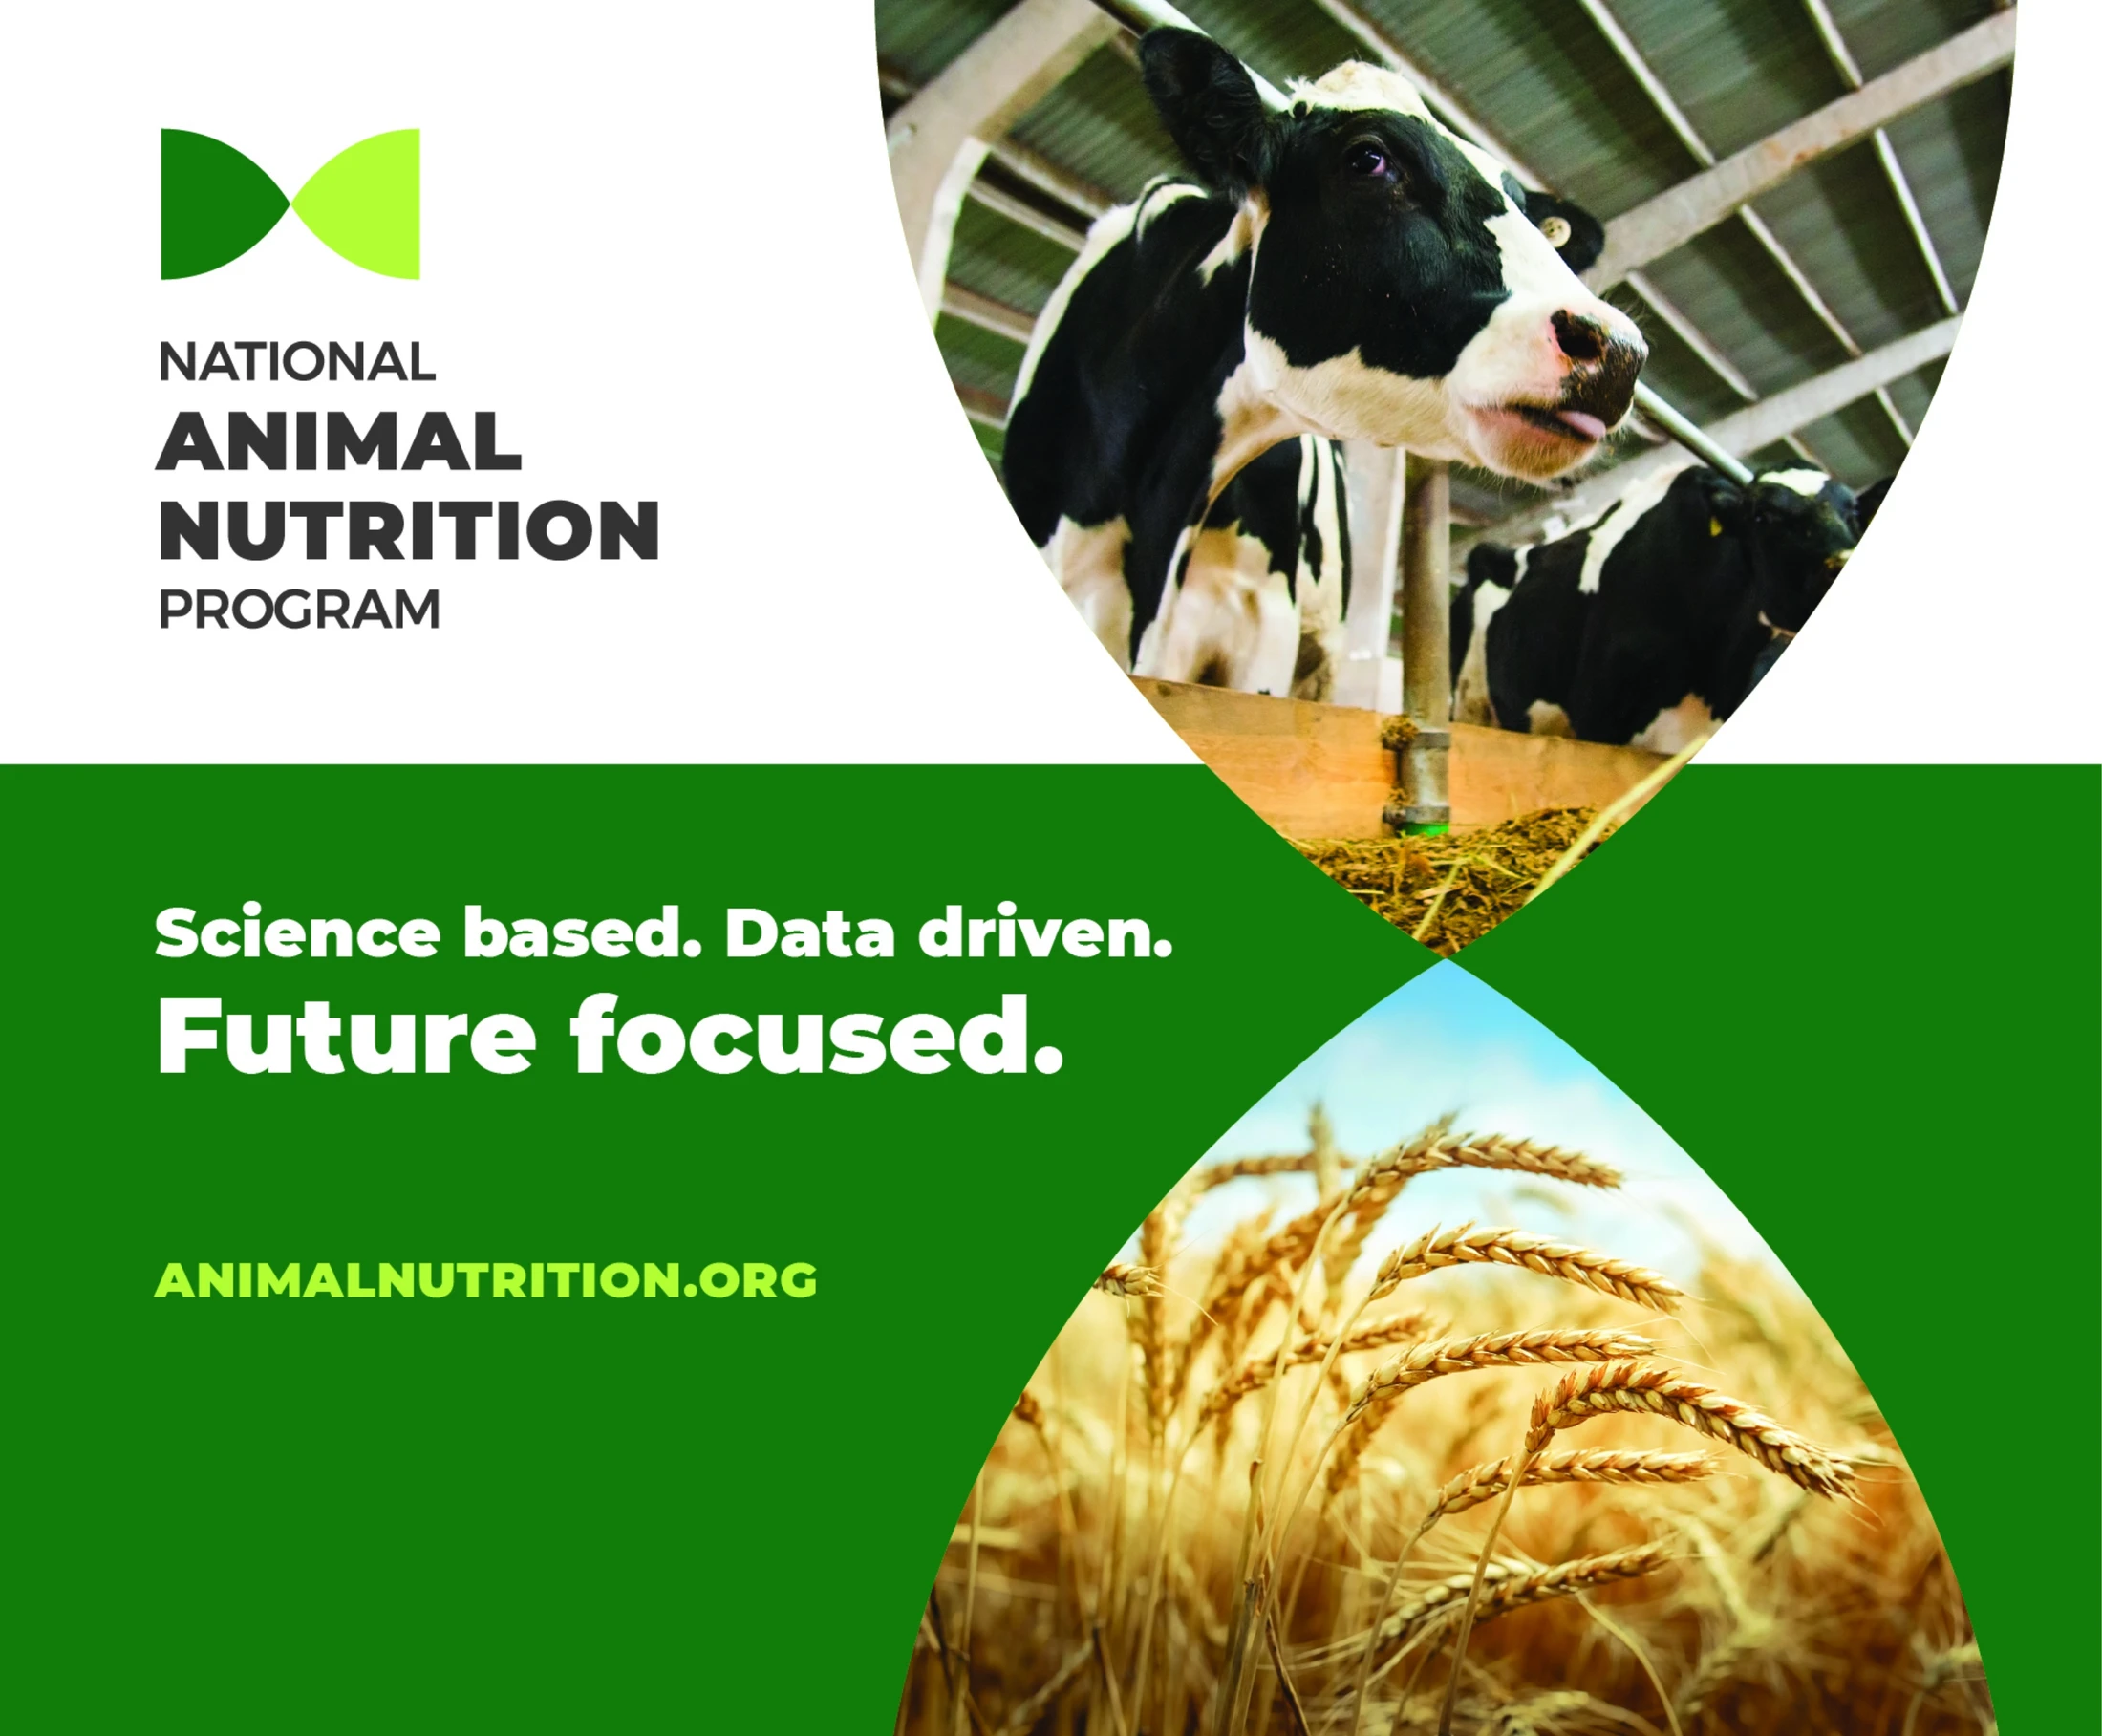 A poster for the national animal nutrition program.